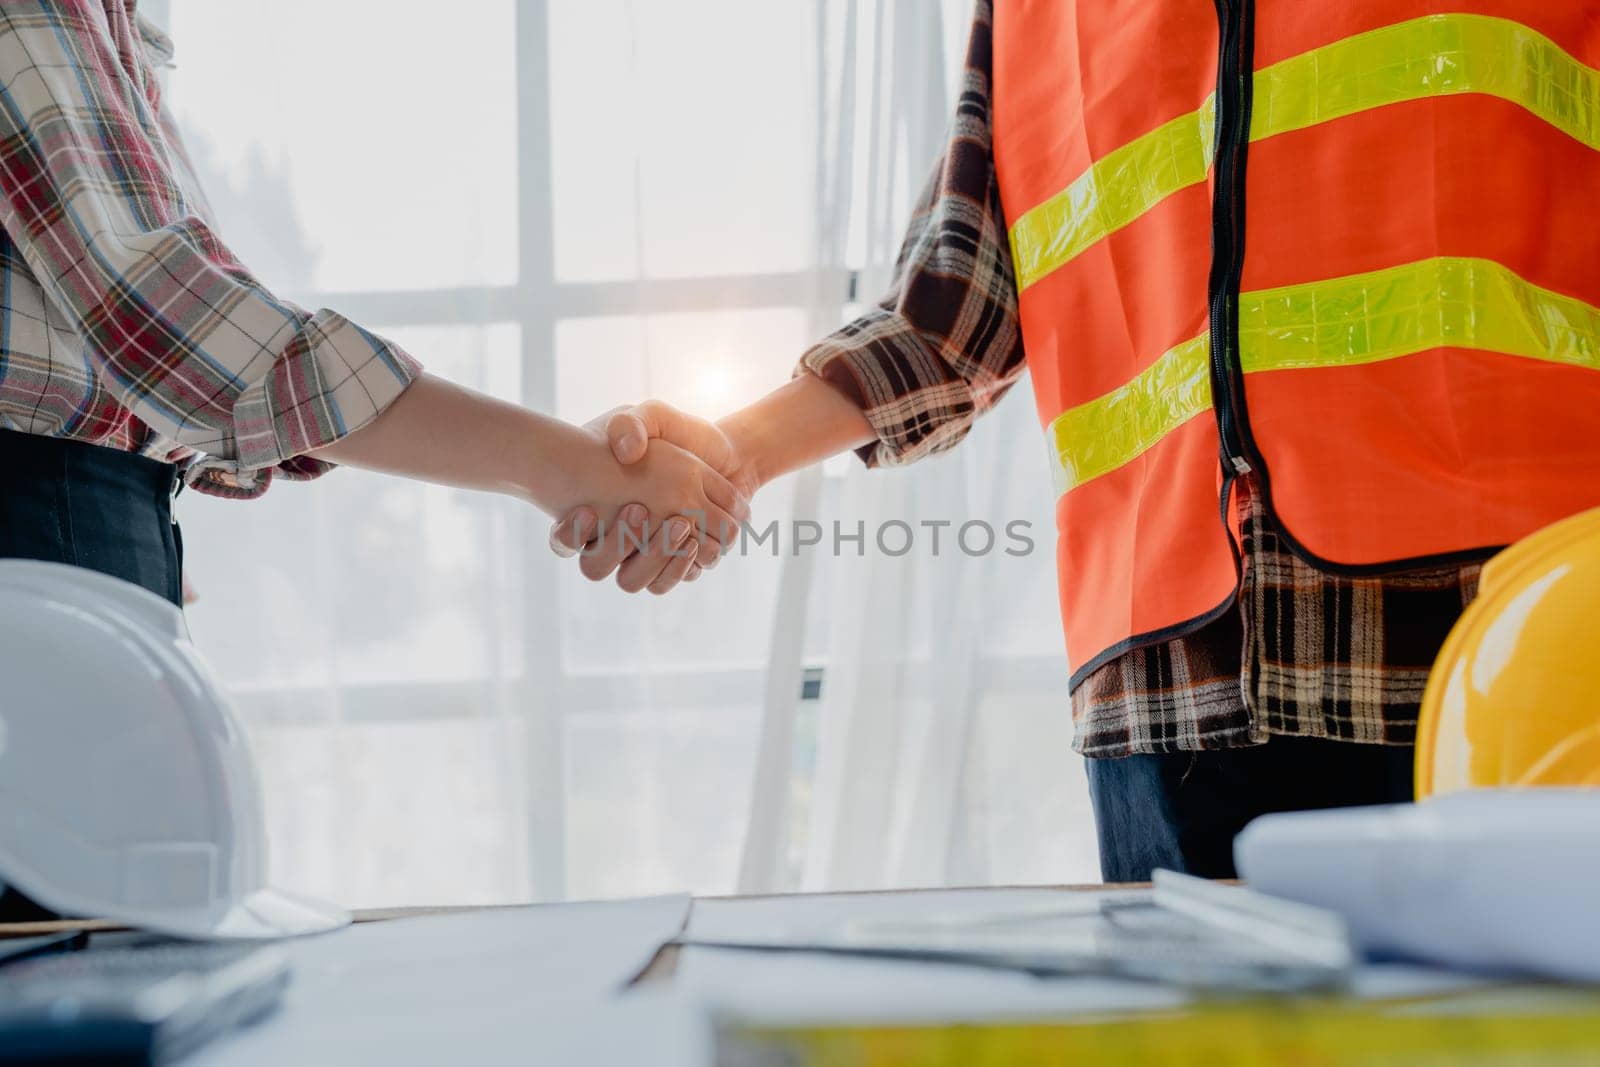 Engineers, designers and interior designers are handshake shack hands deal finalizing the design of interiors by discussing selecting materials and colors to design rooms to present to clients